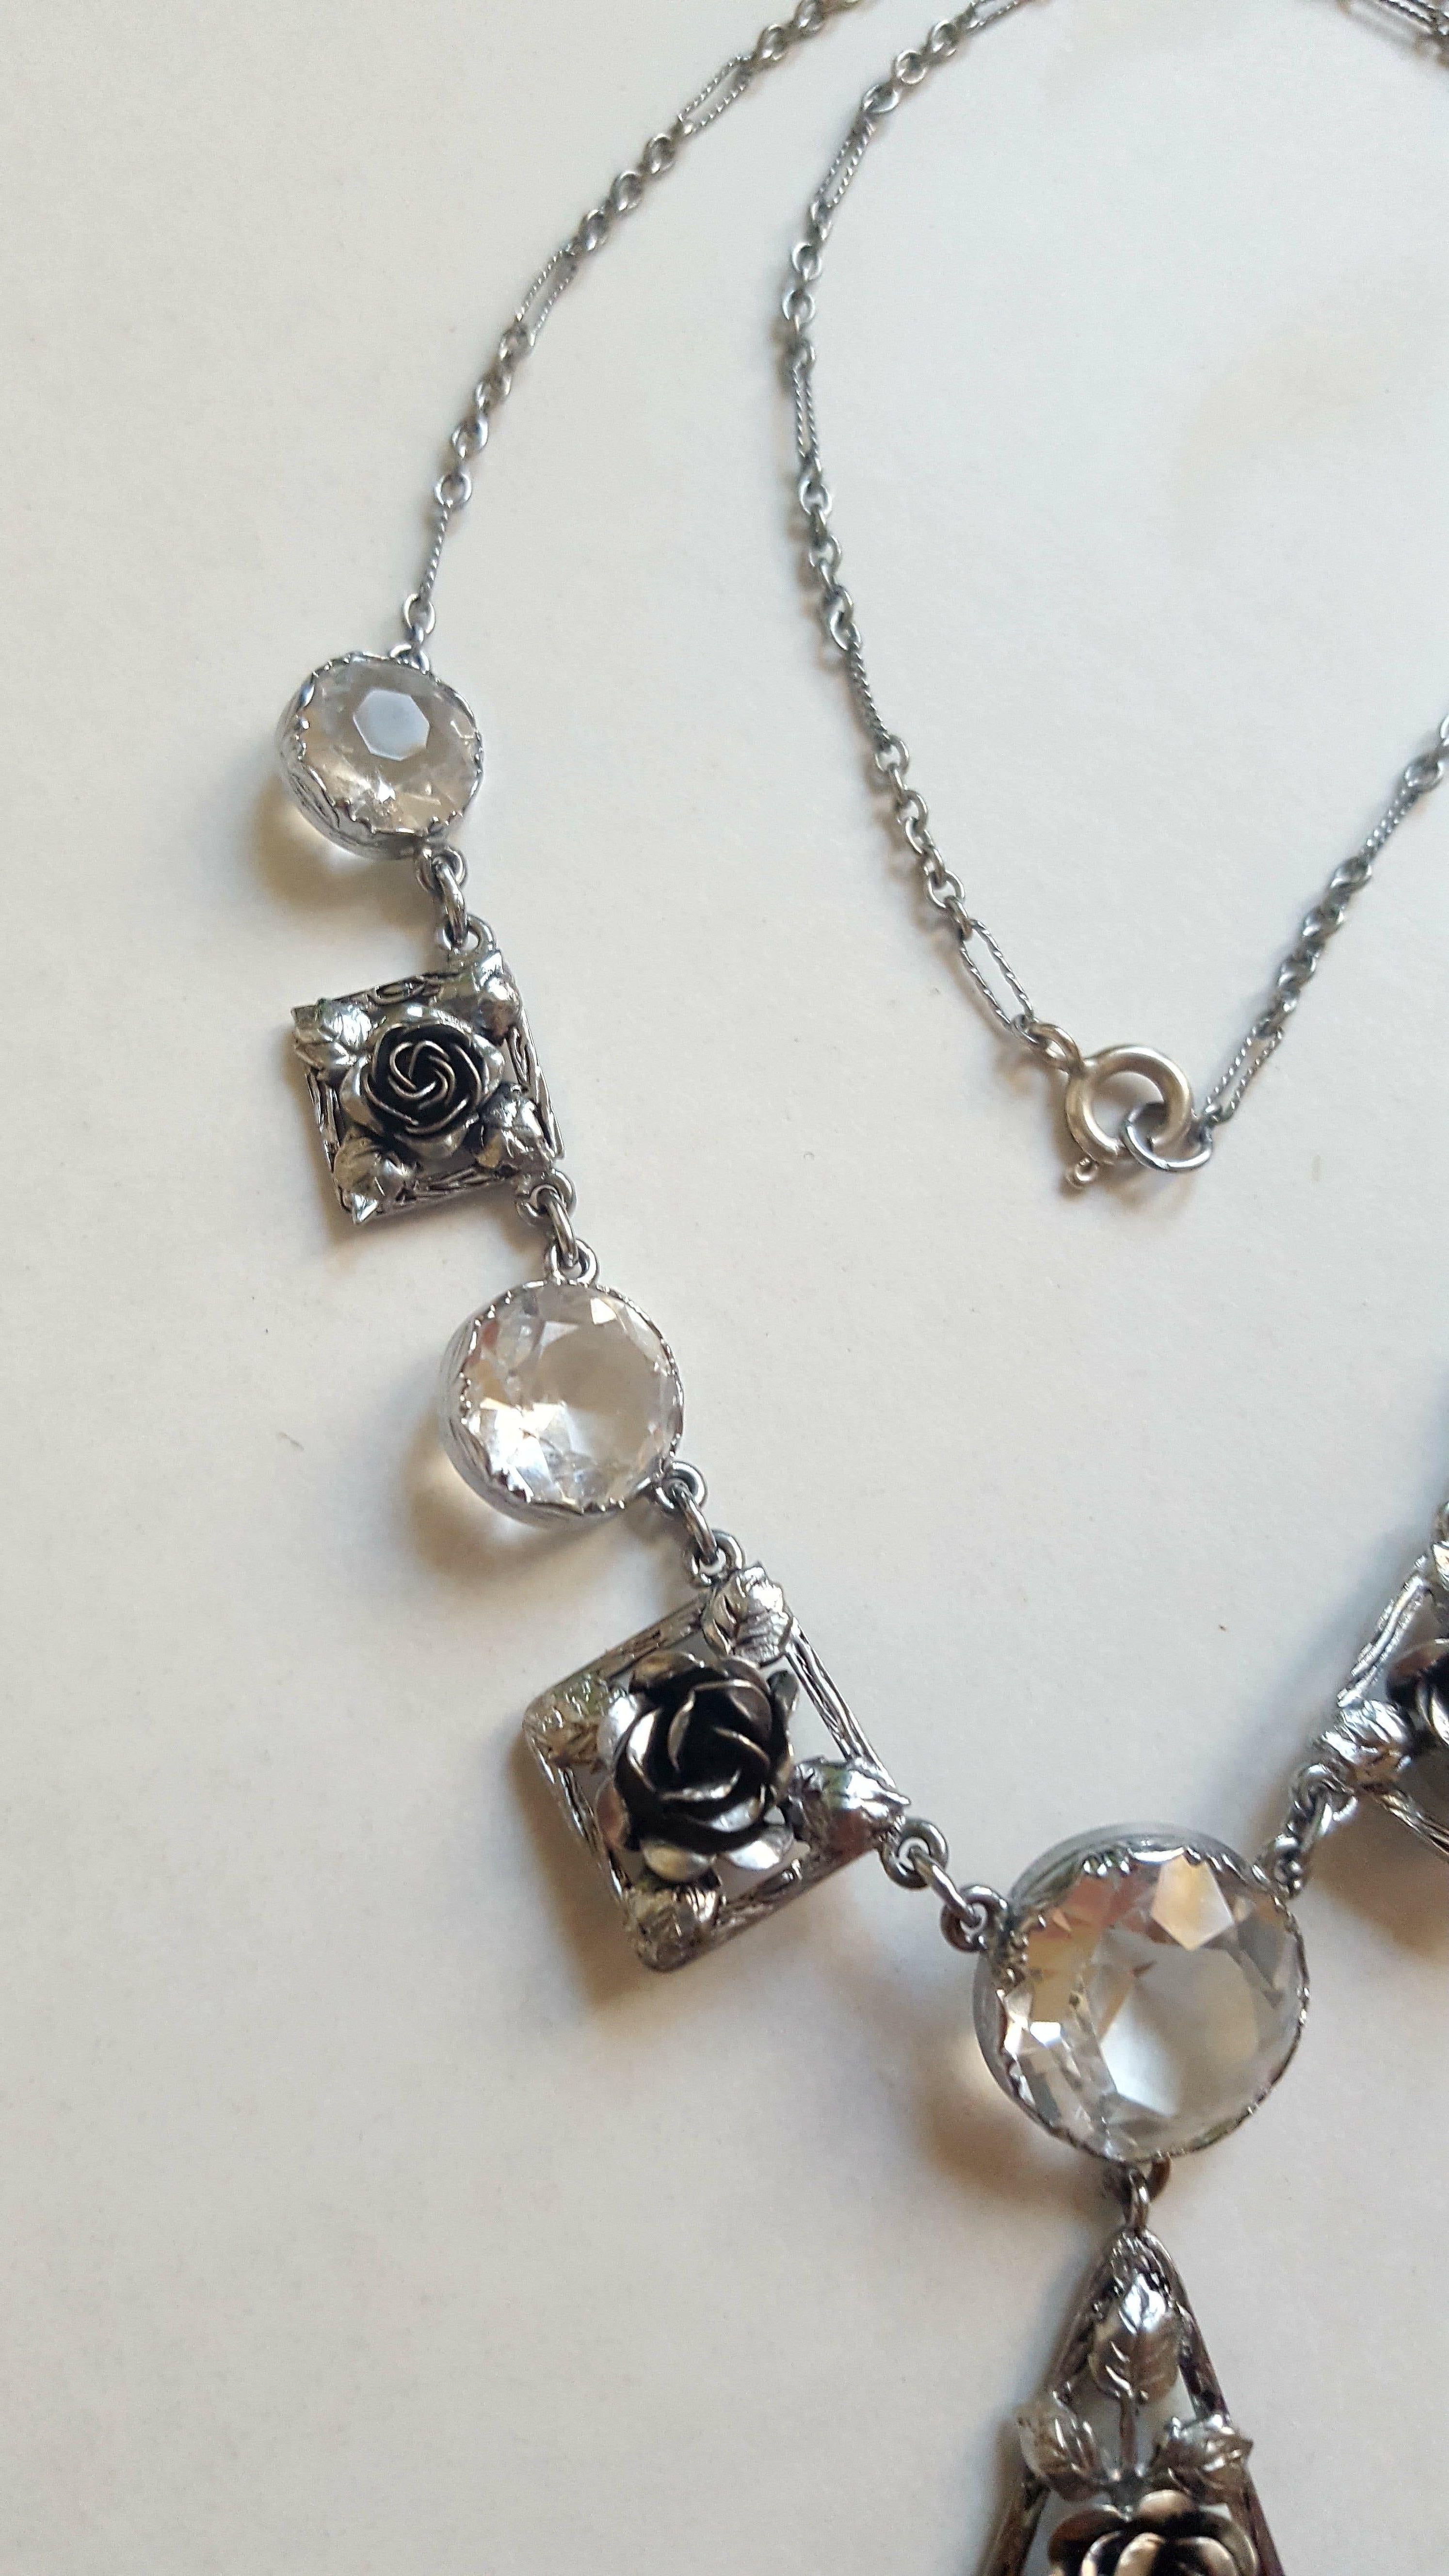 A Spectacular Art Deco c.1920s Chromium plated Solid Silver and Crystal Roses necklace. 
Length 16 1/2